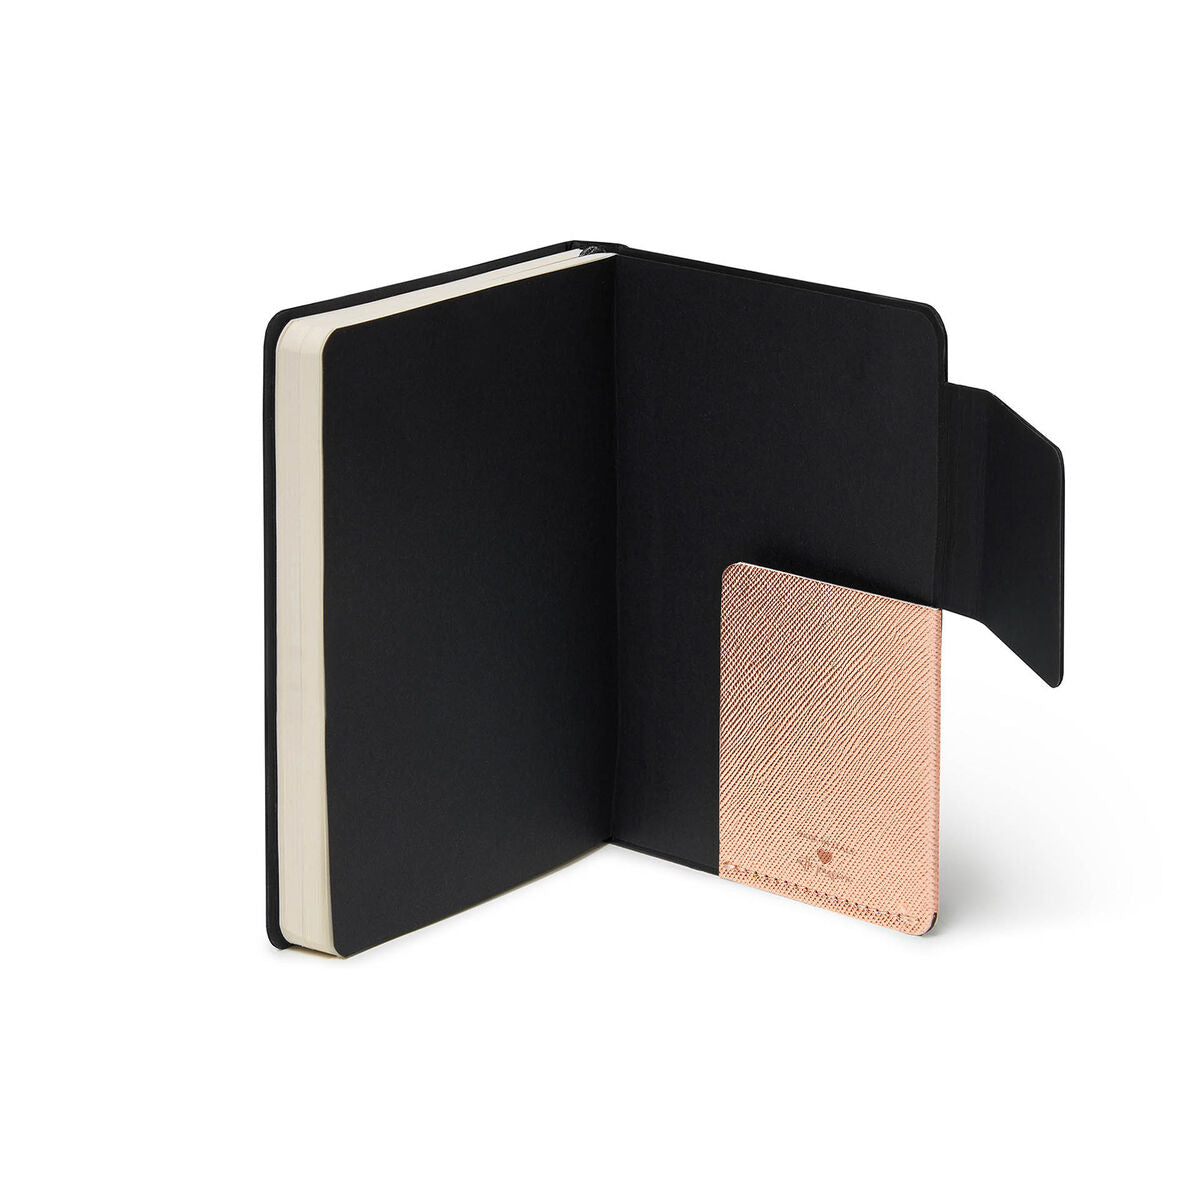 Notebooks | Legami Small Notebook lined Gold by Weirs of Baggot Street